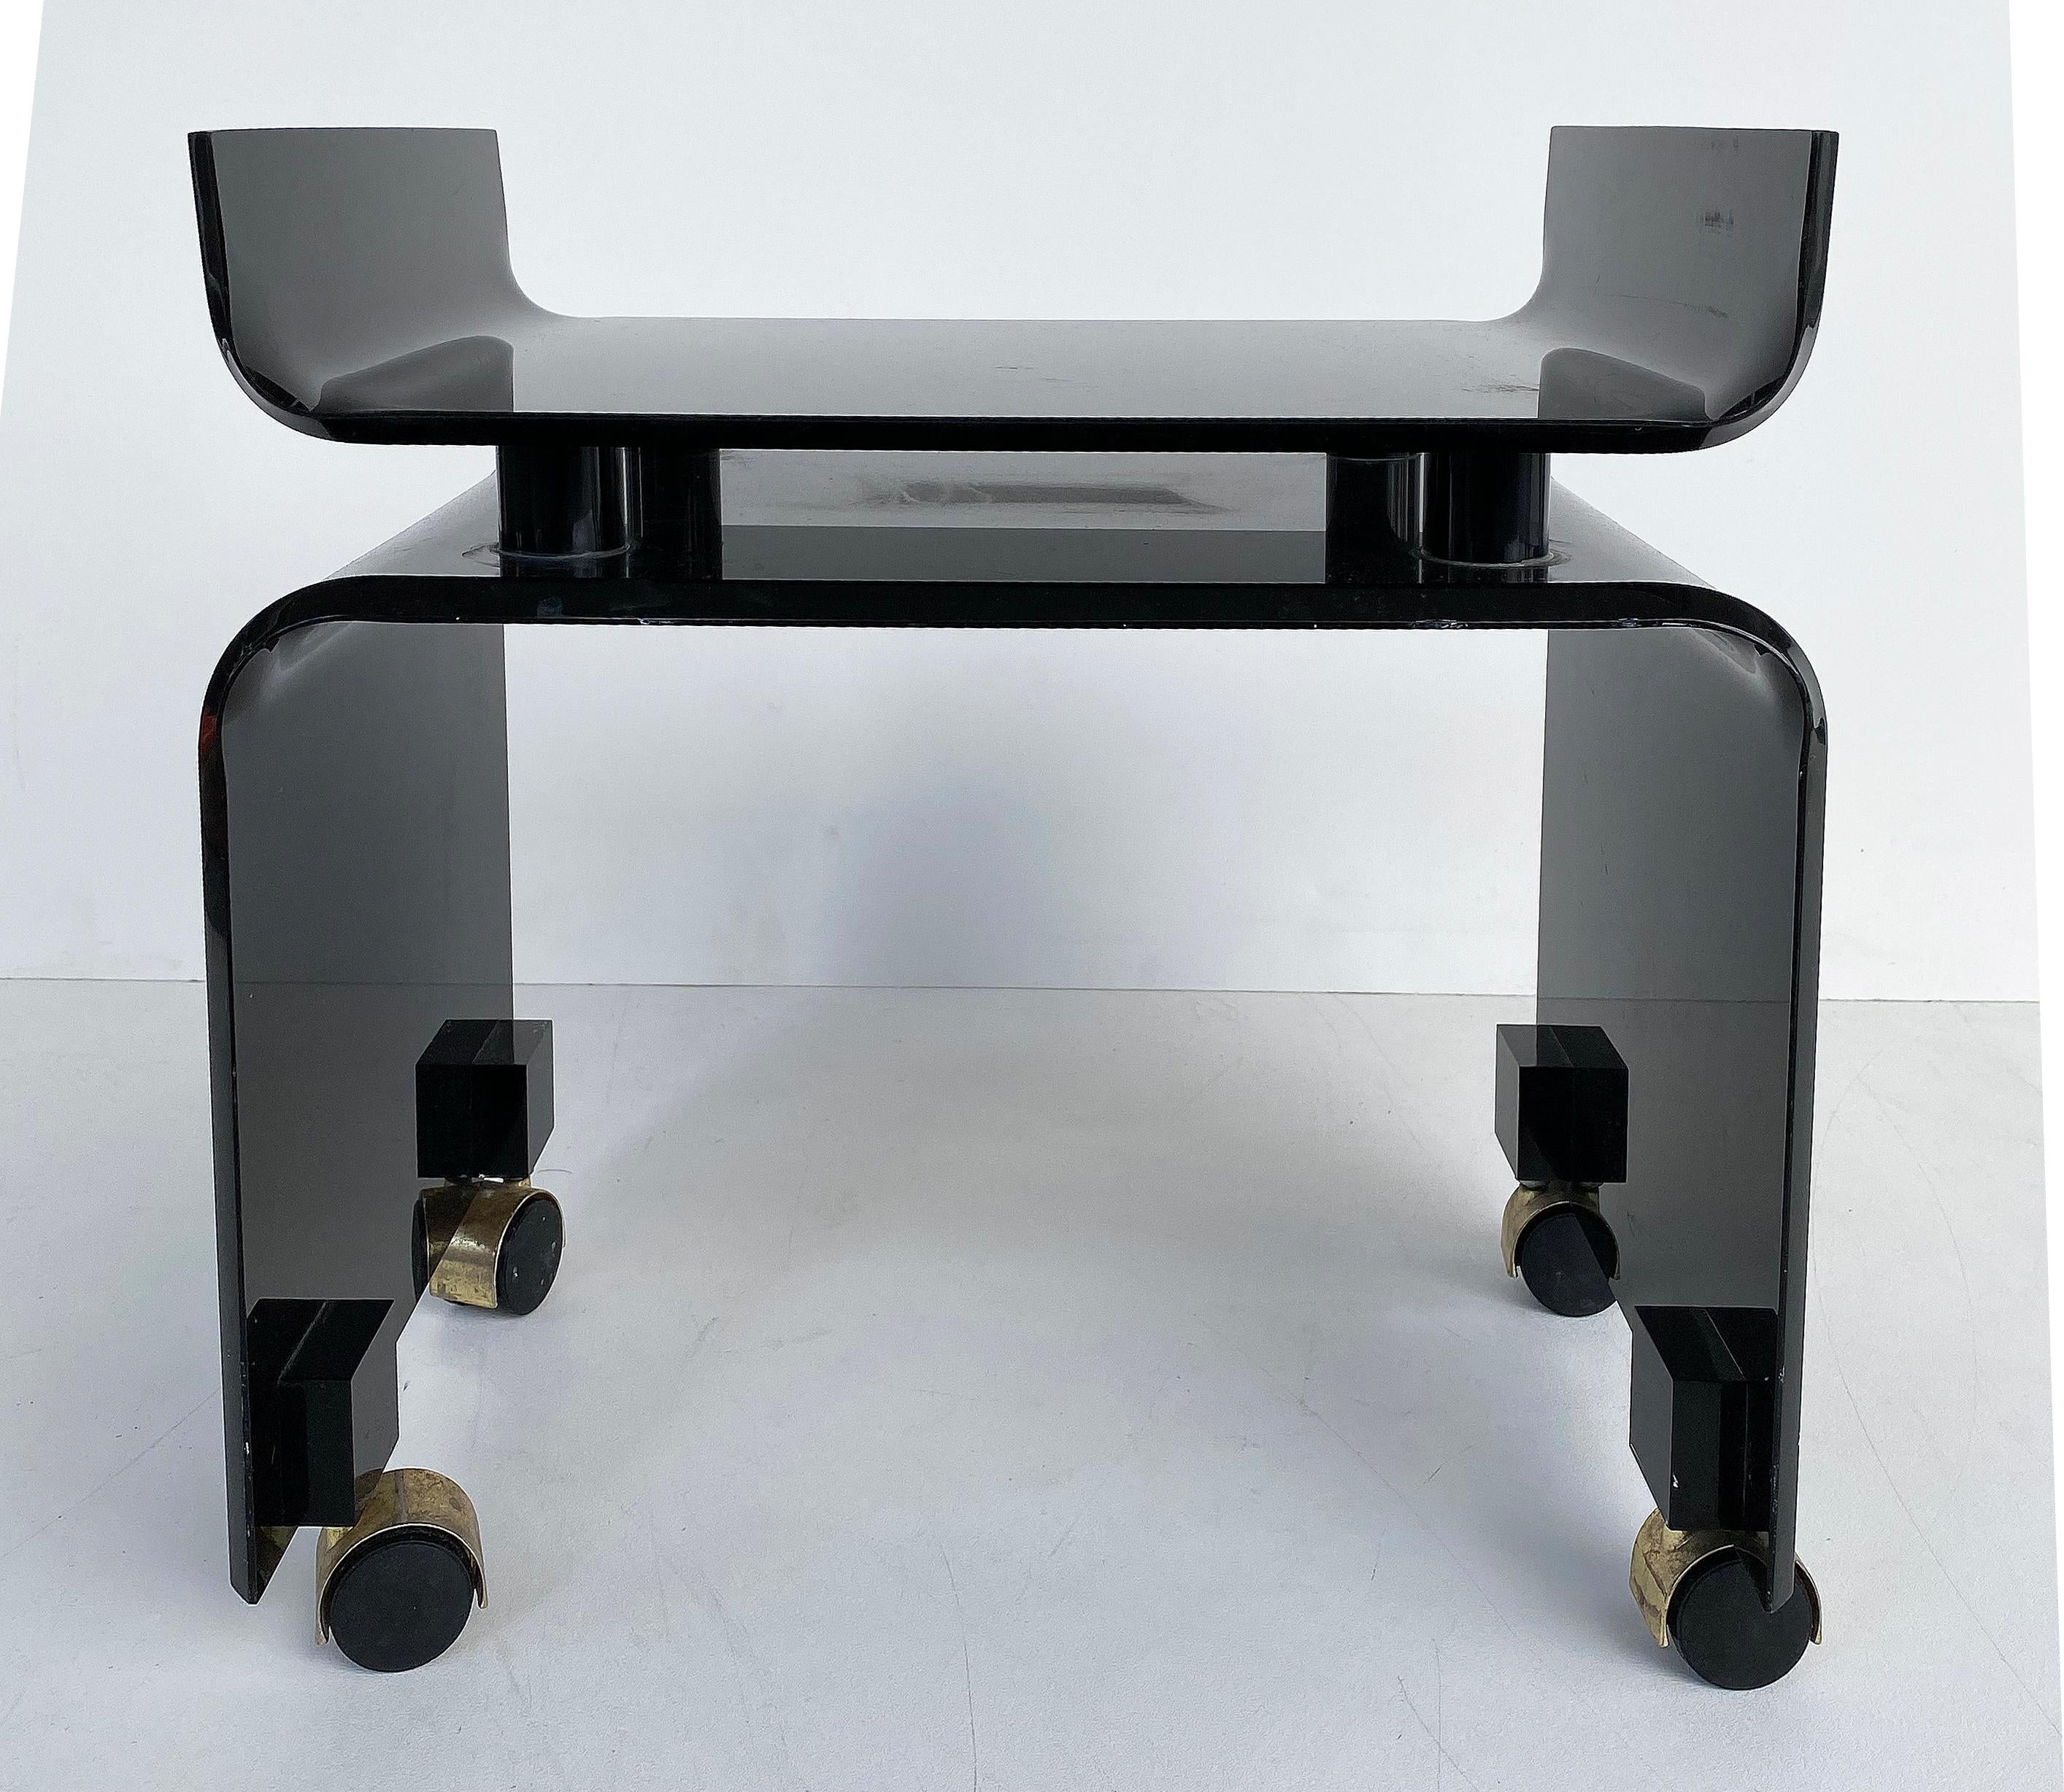 Mid-Century Modern black Lucite vanity bench on casters

Offered for sale is a black Lucite acrylic vanity bench on casters. The casters are gold-tone. The bench has curved sides on top that are designed to hold a thick custom made upholstered